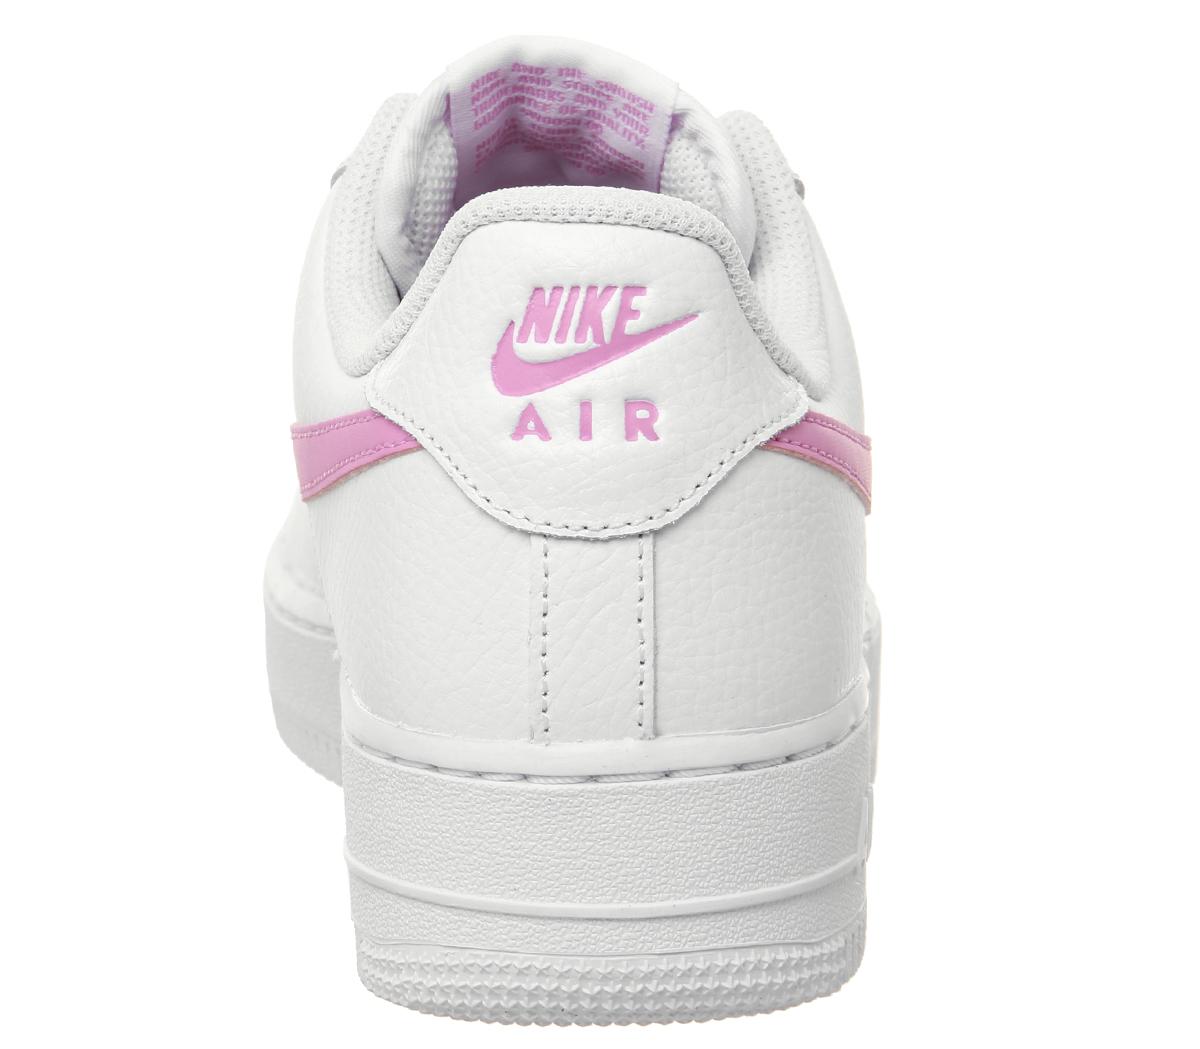 nike air force 1 psychic pink and white